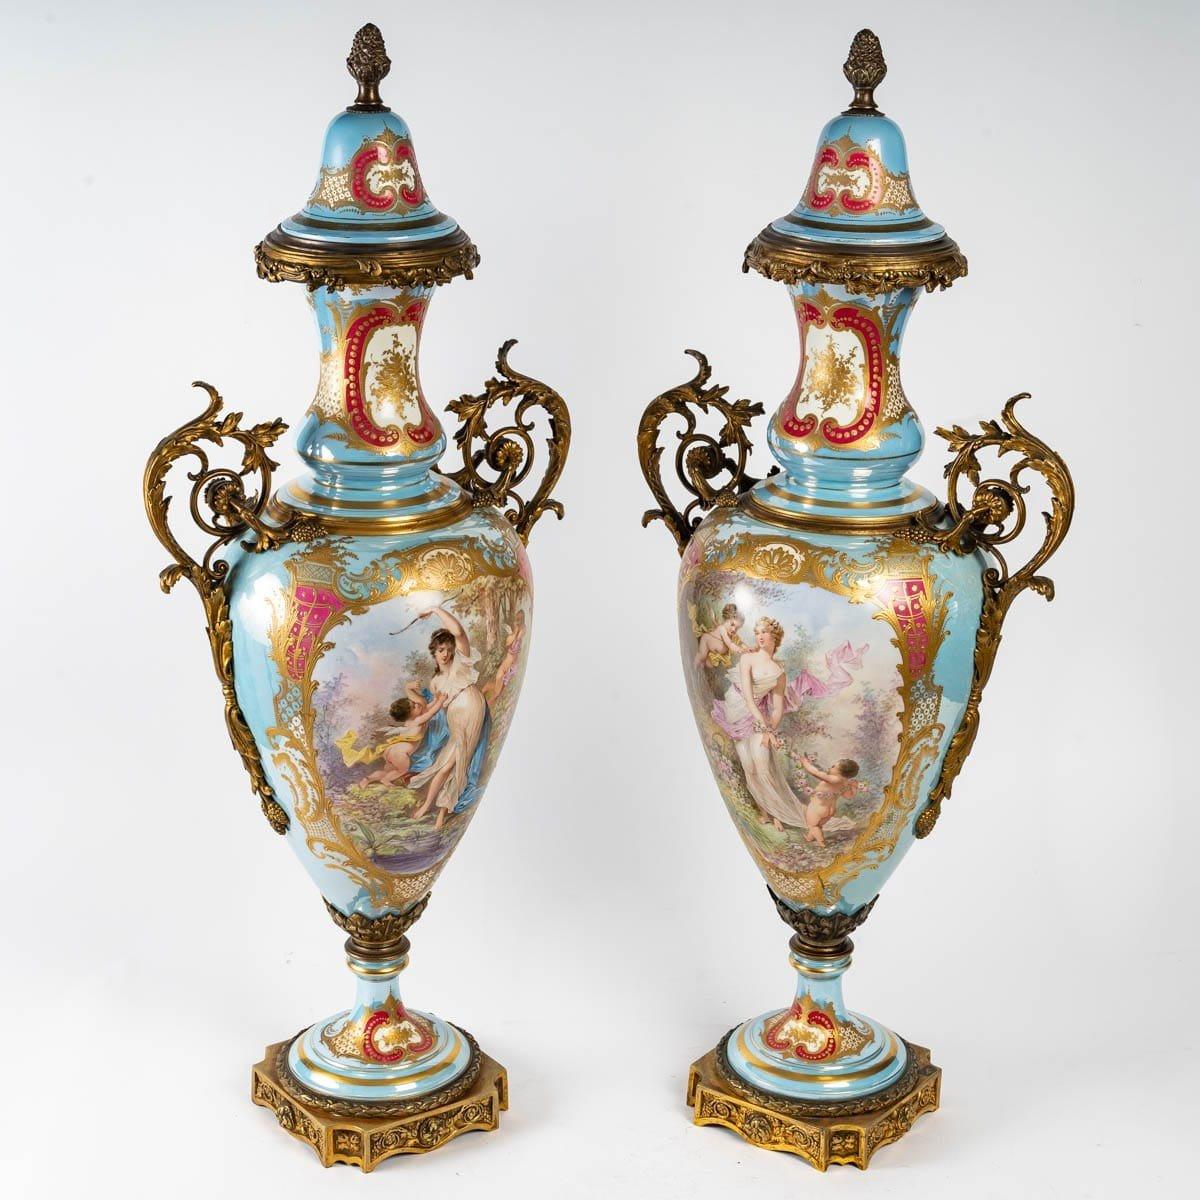 Napoleon III Very Important Pair of bright turquoise Sèvres Porcelain Vases, signed Sèvres